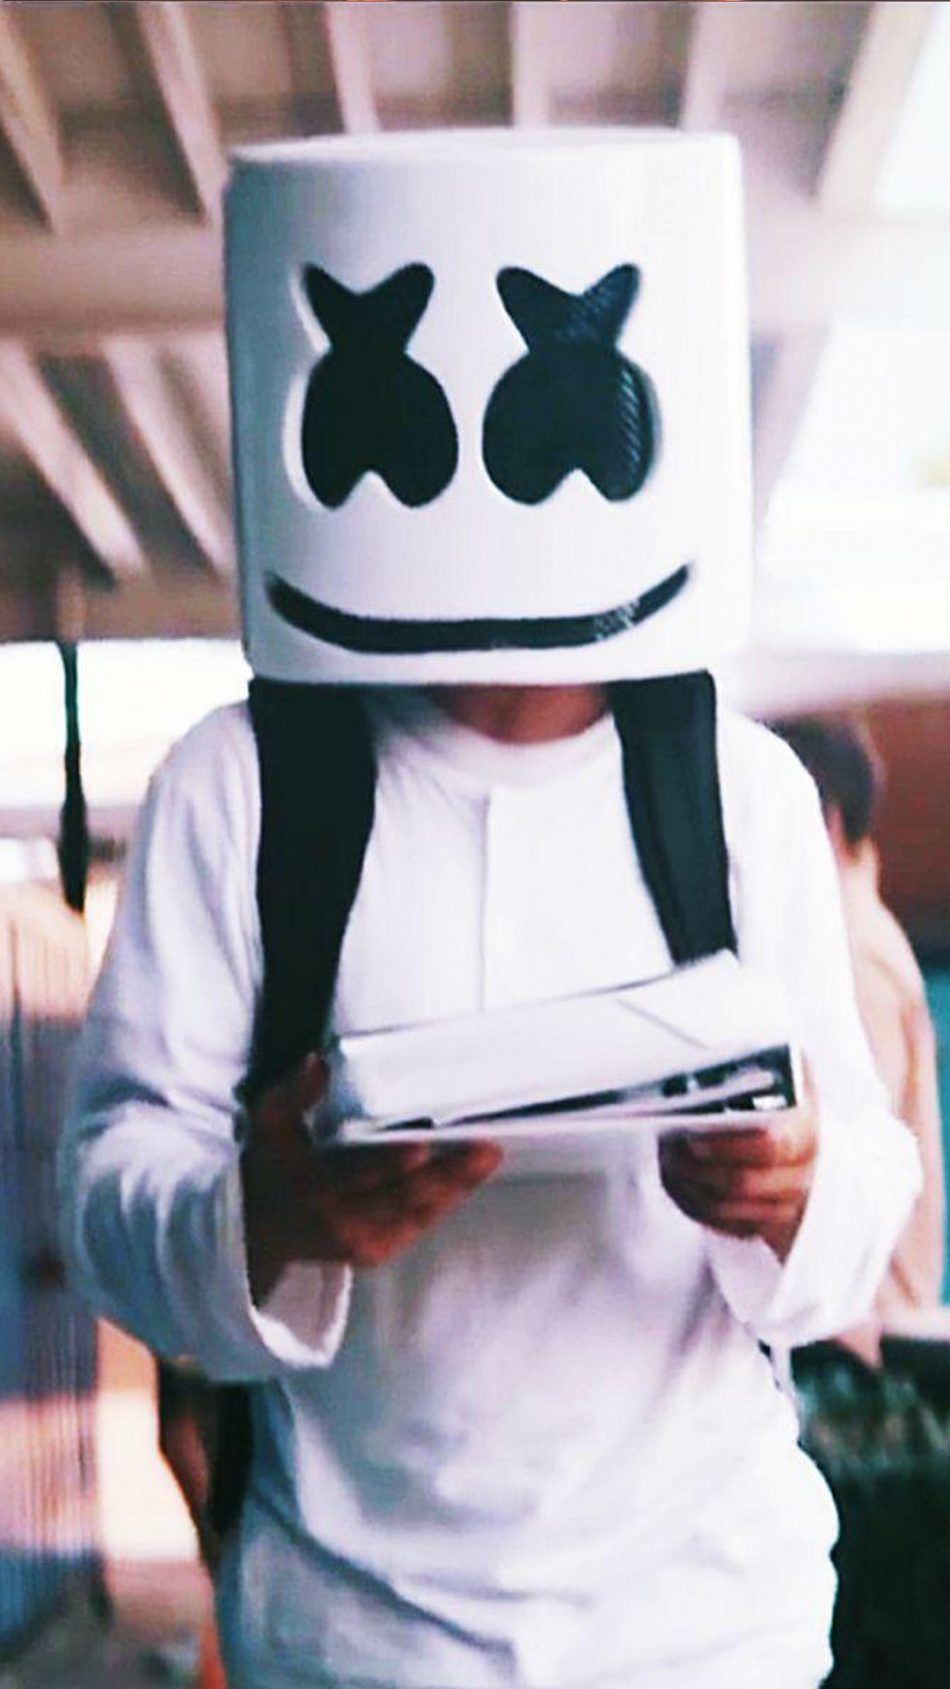 Free download Download American Famous DJ Marshmello Pure 4K Ultra HD [950x1689] for your Desktop, Mobile & Tablet. Explore Marshmello 2019 Wallpaper. Marshmello 2019 Wallpaper, Marshmello Wallpaper HD, Dj Marshmello Wallpaper